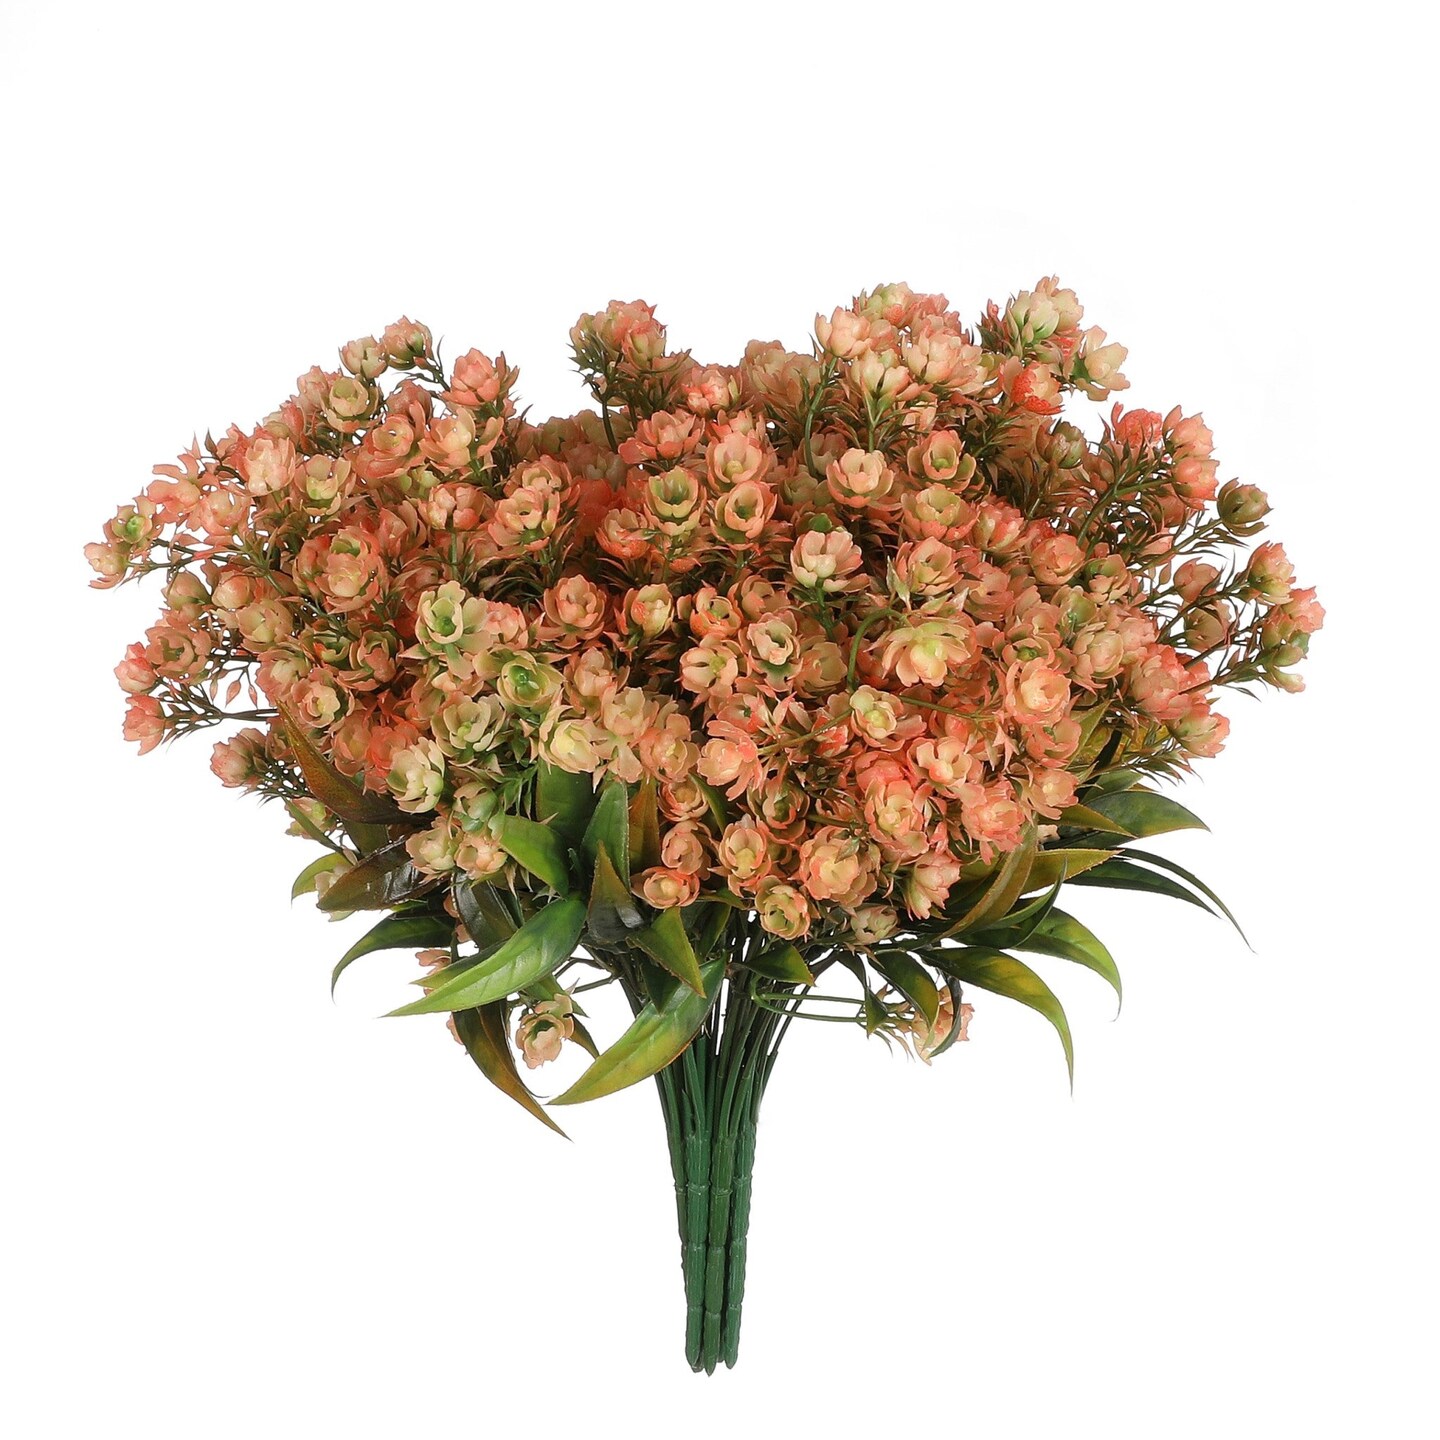 Grand Verde Small Artificial Flowers Faux Wildflower 13” Stems, Real-Touch  Plastic Bouquets Bulk - 10pcs